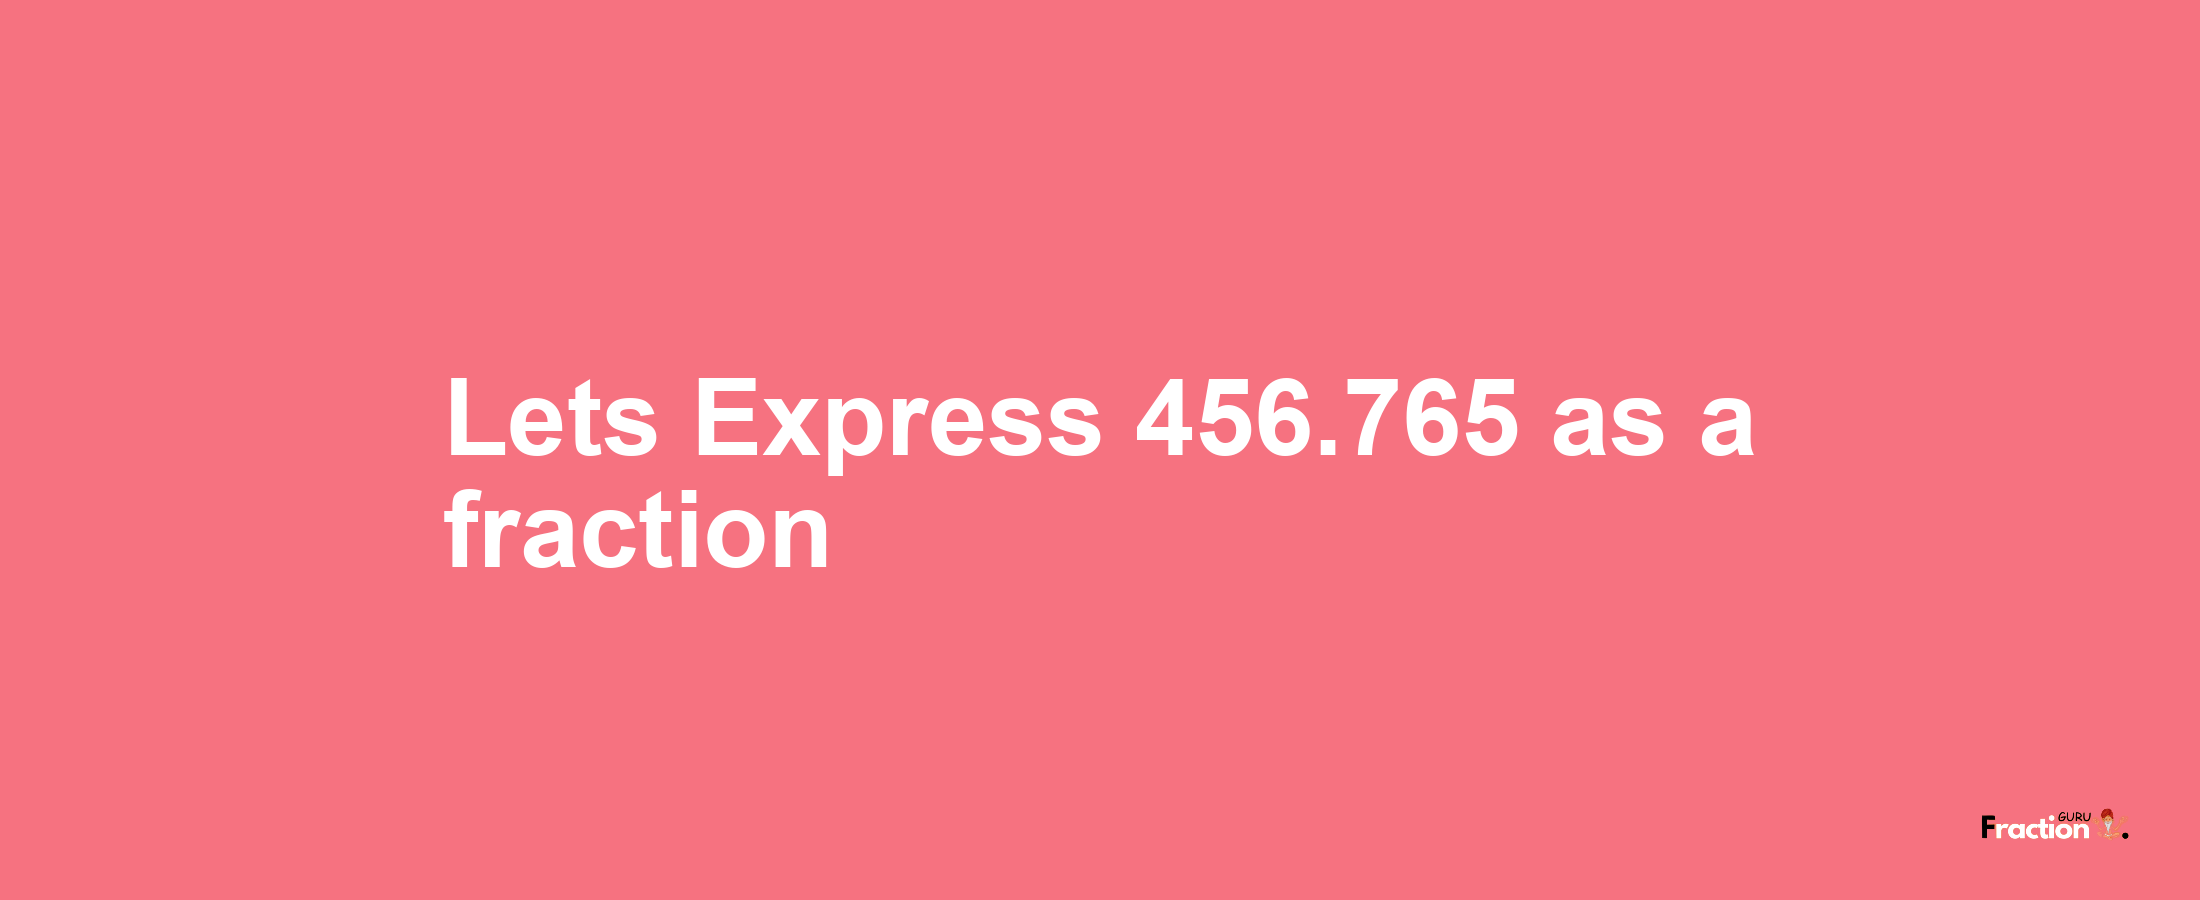 Lets Express 456.765 as afraction